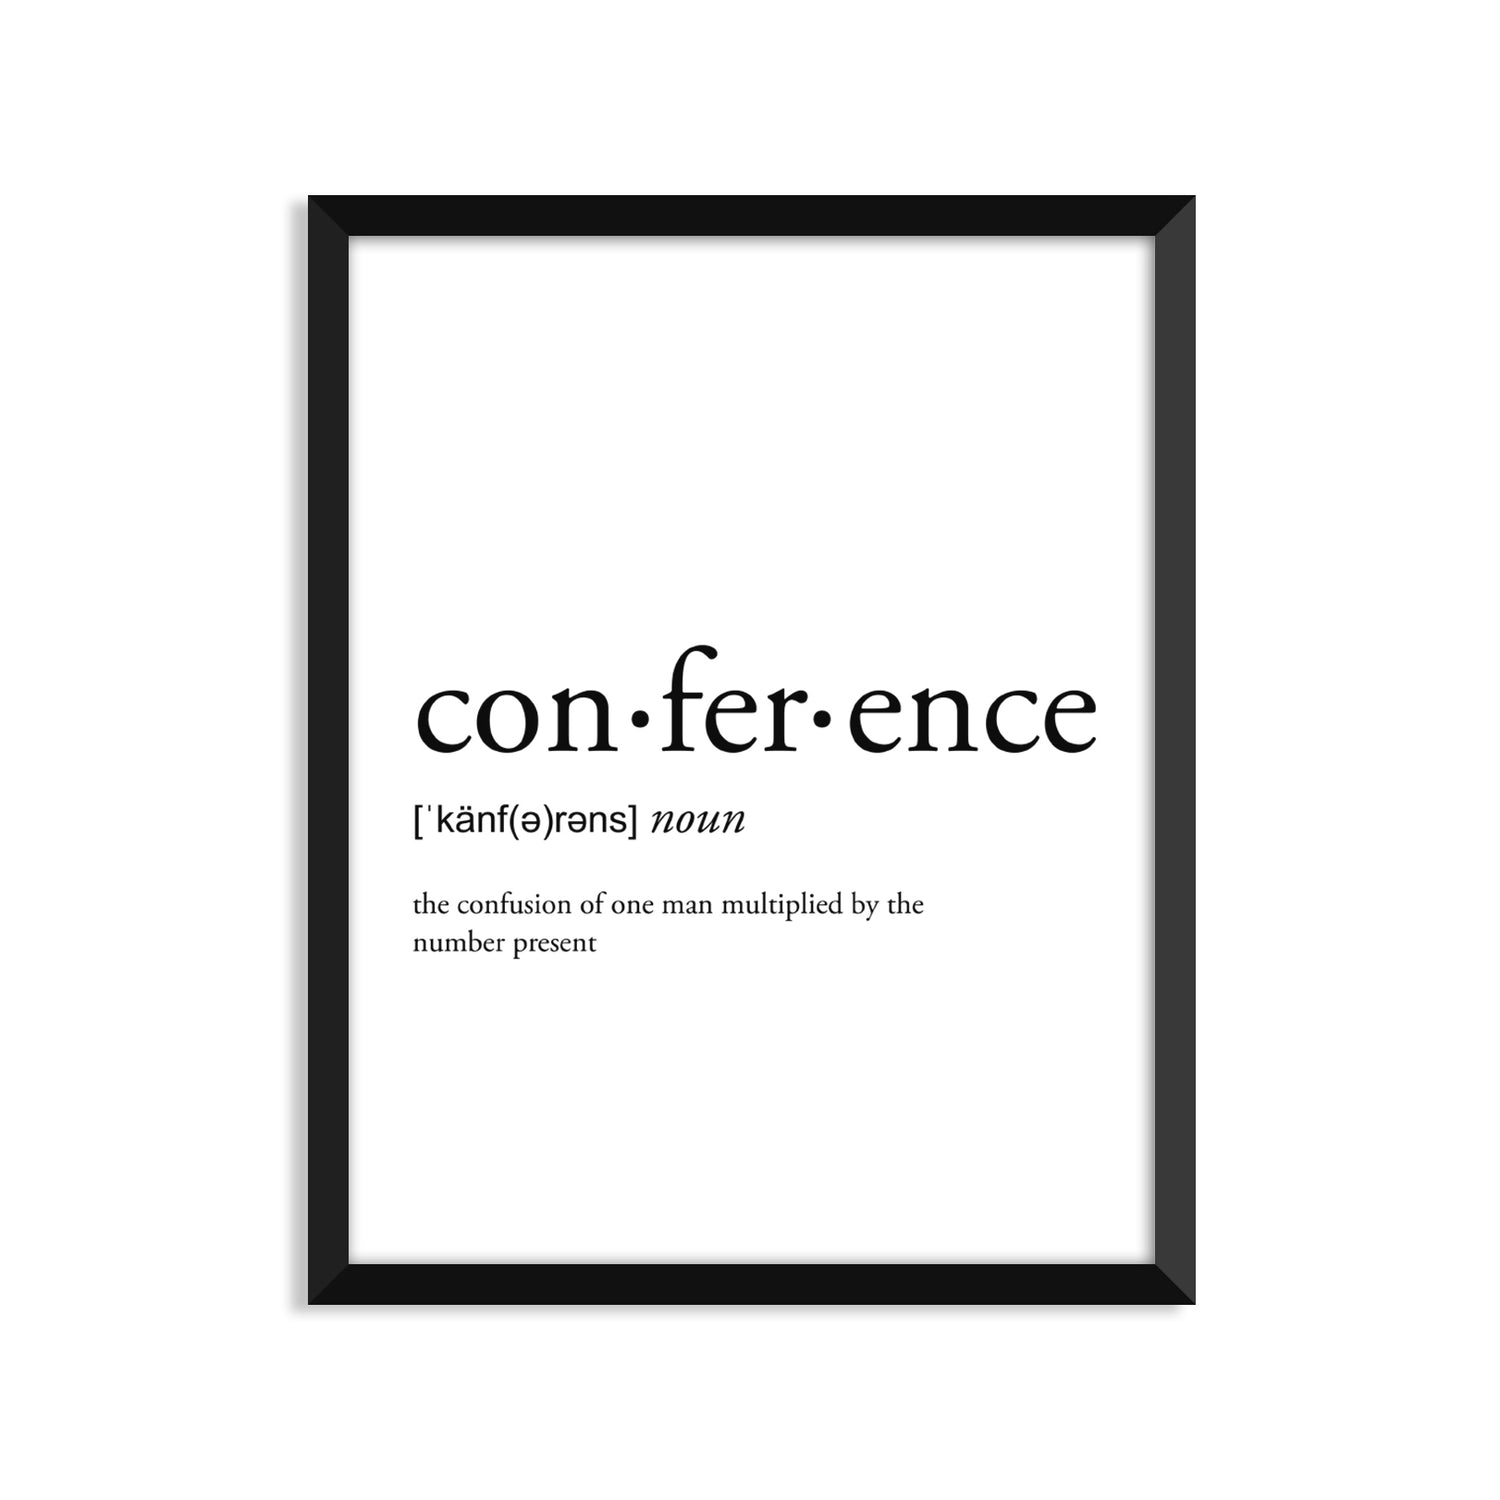 Conference Definition - Unframed Art Print Or Greeting Card